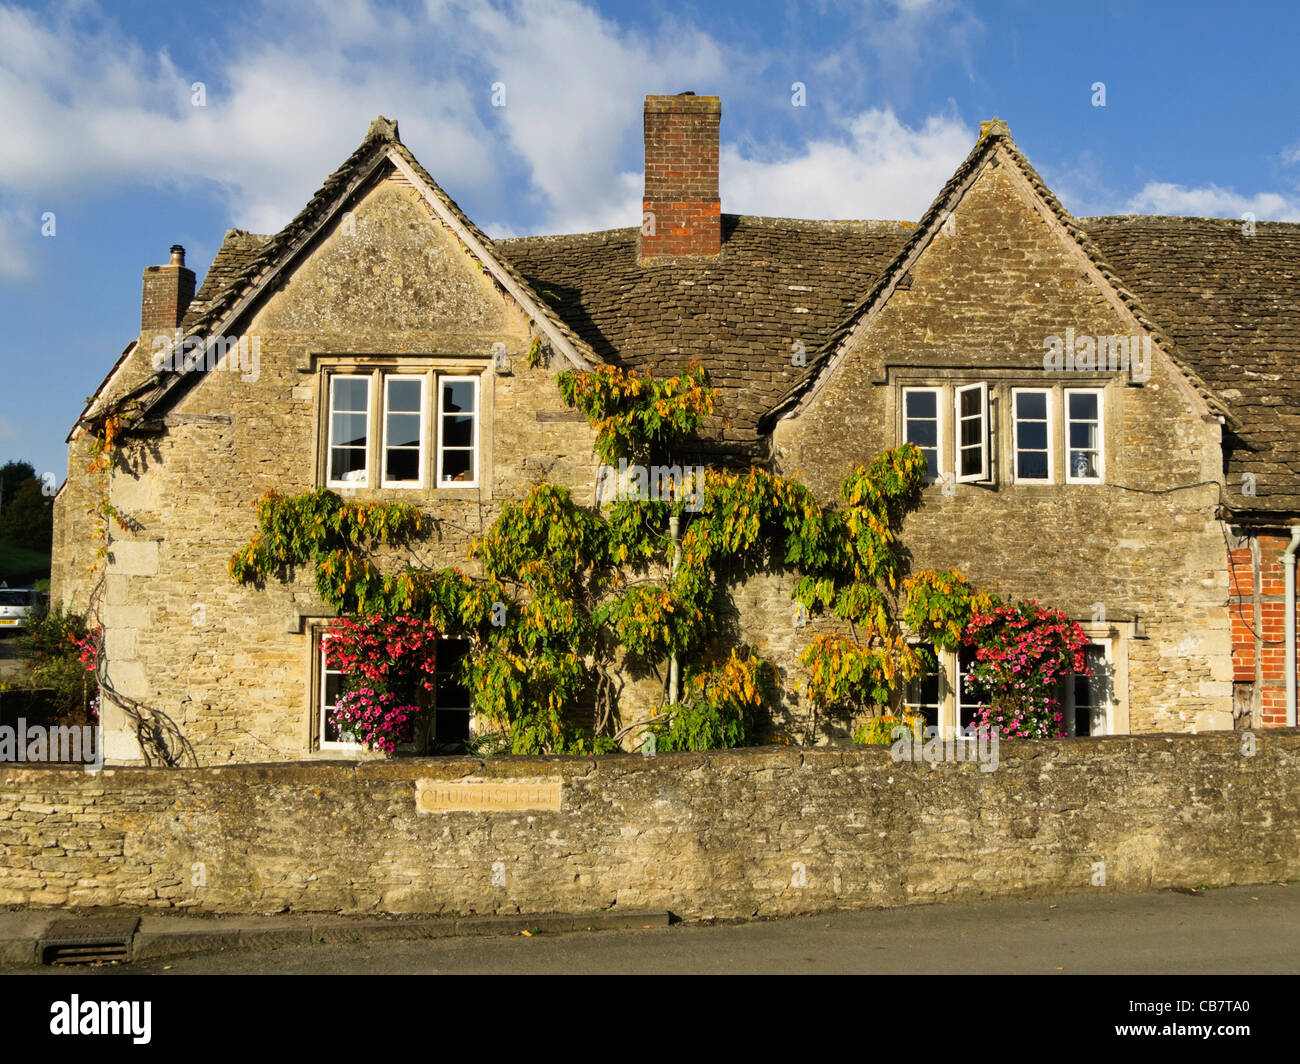 Old house UK à Lacock, Wiltshire, Angleterre Banque D'Images